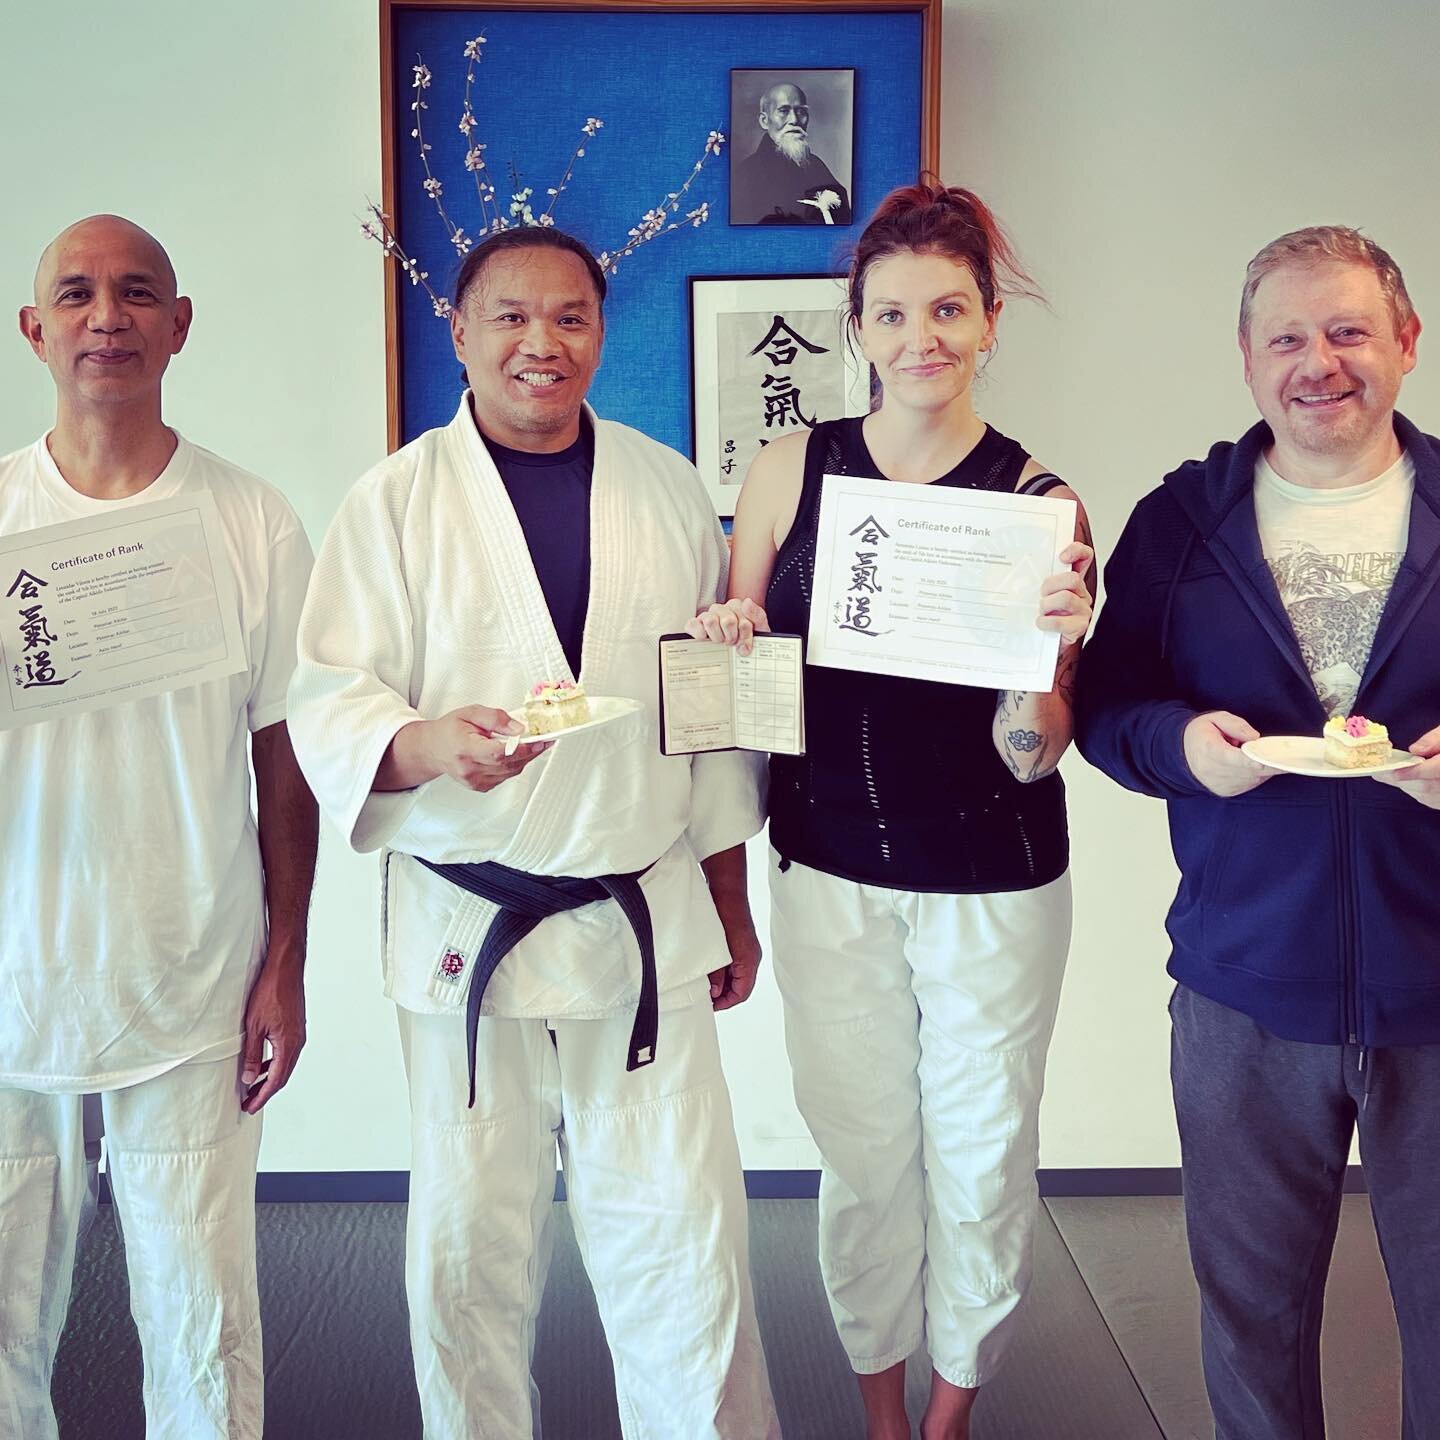 Congratulations to Leo, Tonya and Sergey on their recent promotions and Happy Birthday to Ed Santos sensei. #aikido #training #exercise #workout #keepworking #fitness #martialarts  #bushido #healthy @eduardosuave @girlunfurl